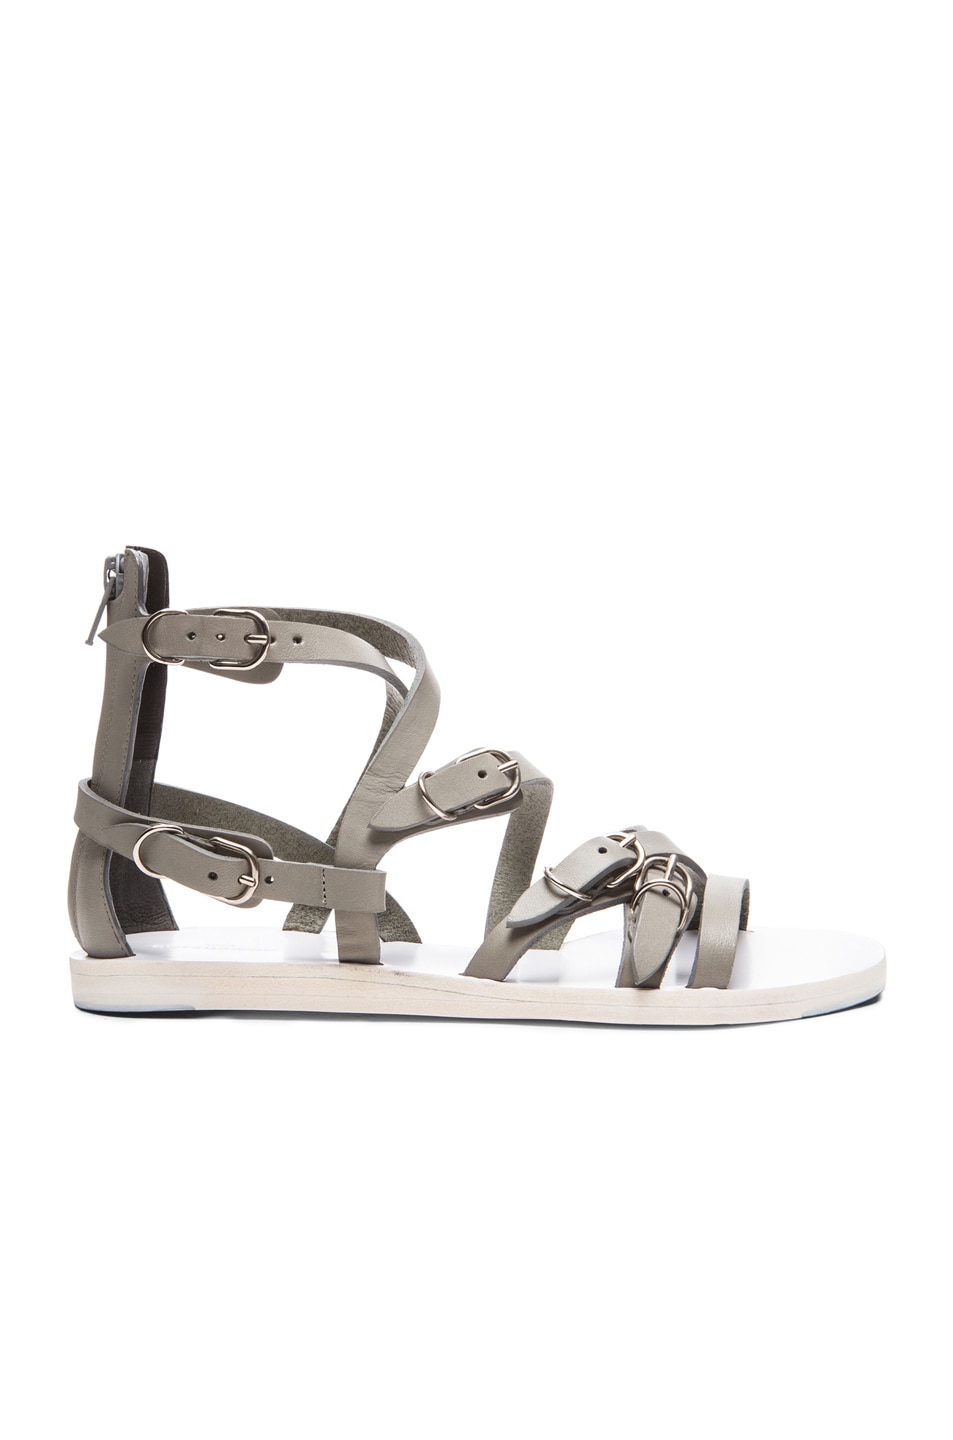 Image 1 of Balenciaga Multistrap Leather Sandals in Grey